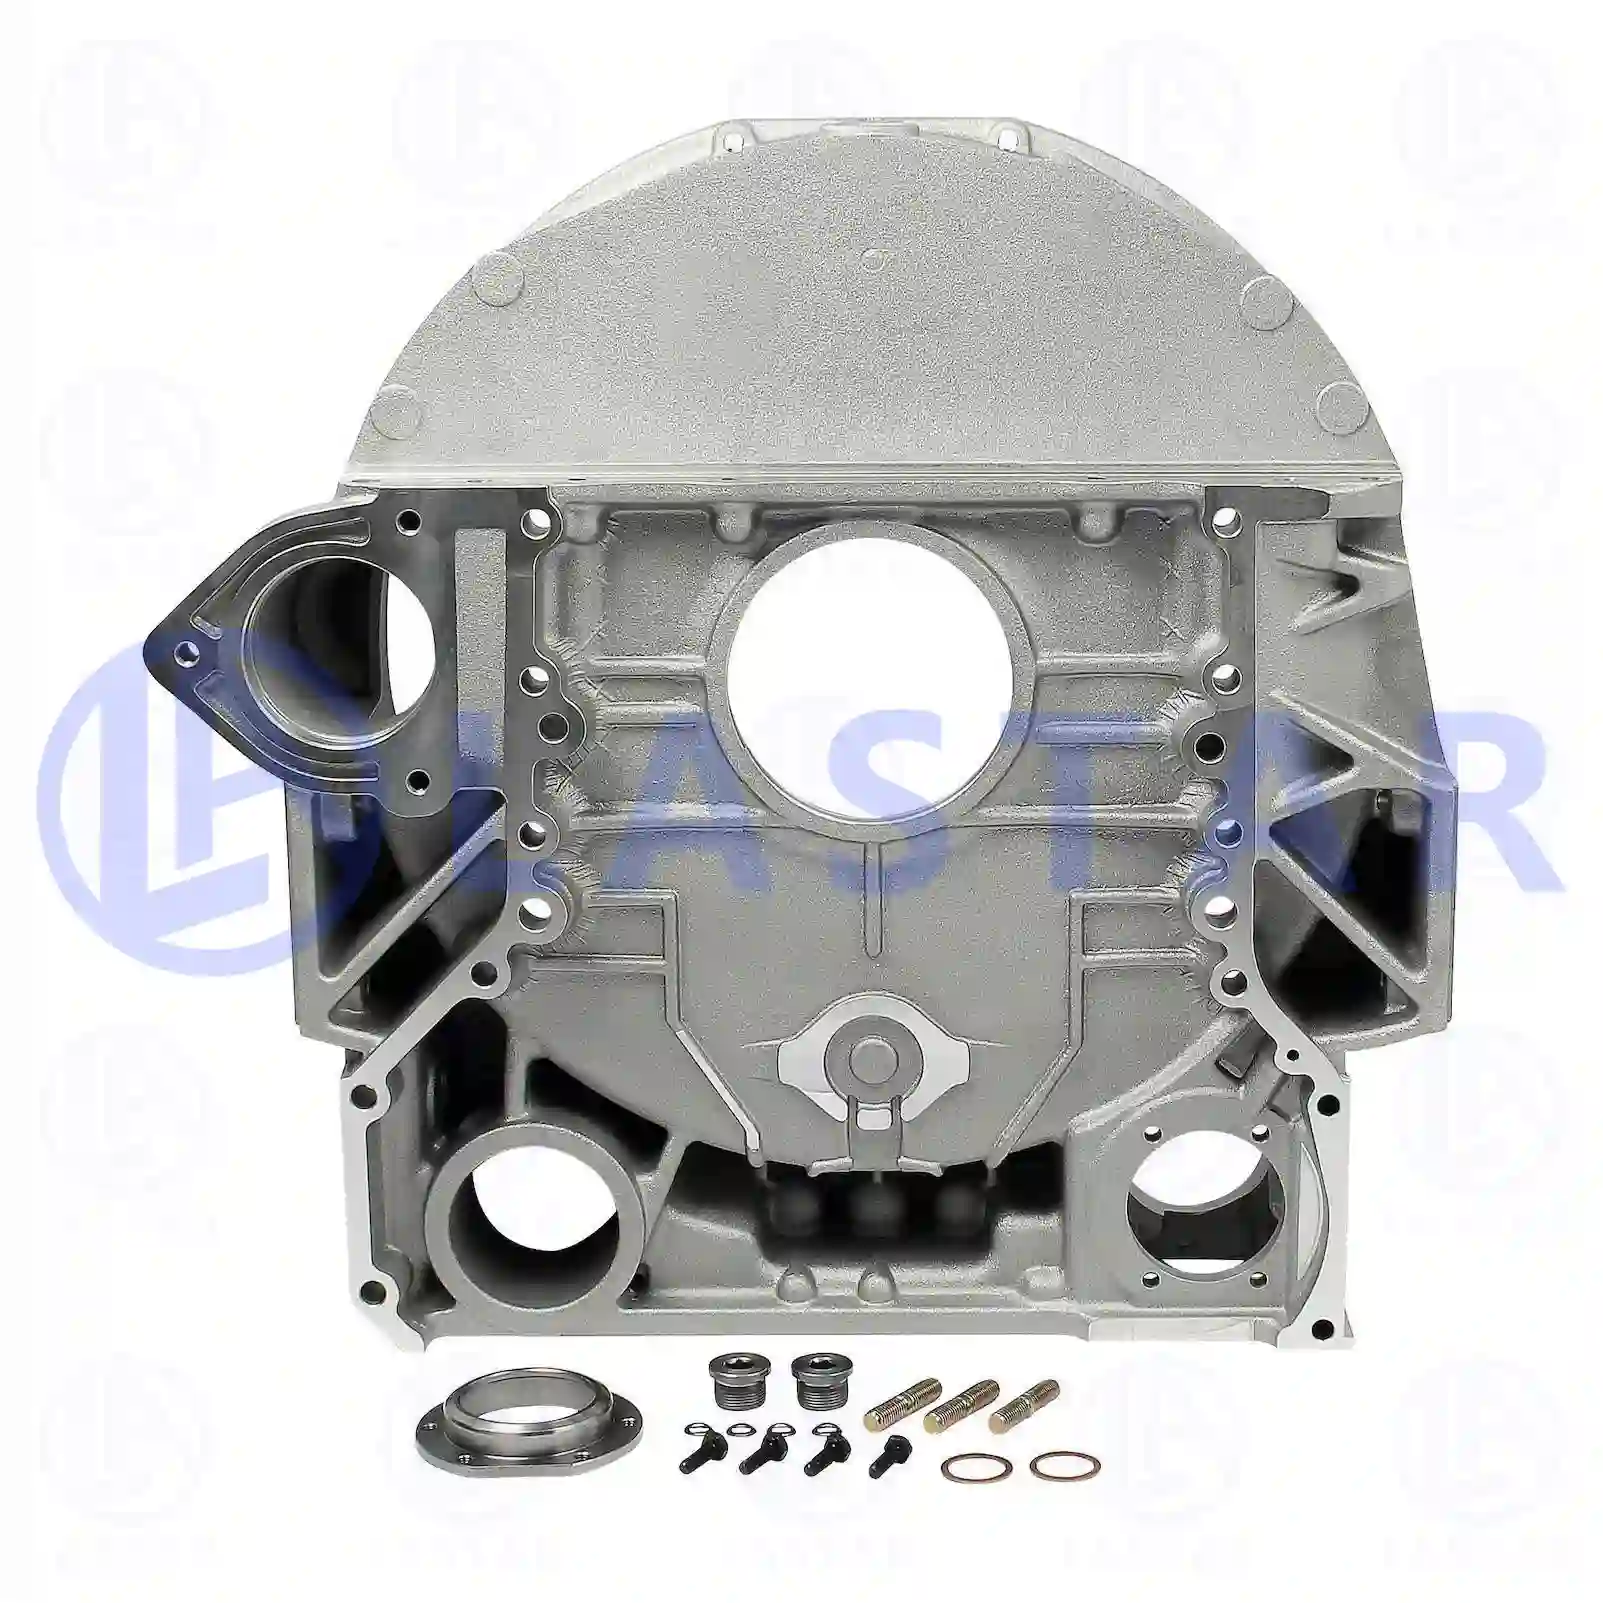 Timing case, 77701895, 4030104633, 4230100833, 4230101033, 4230105033 ||  77701895 Lastar Spare Part | Truck Spare Parts, Auotomotive Spare Parts Timing case, 77701895, 4030104633, 4230100833, 4230101033, 4230105033 ||  77701895 Lastar Spare Part | Truck Spare Parts, Auotomotive Spare Parts